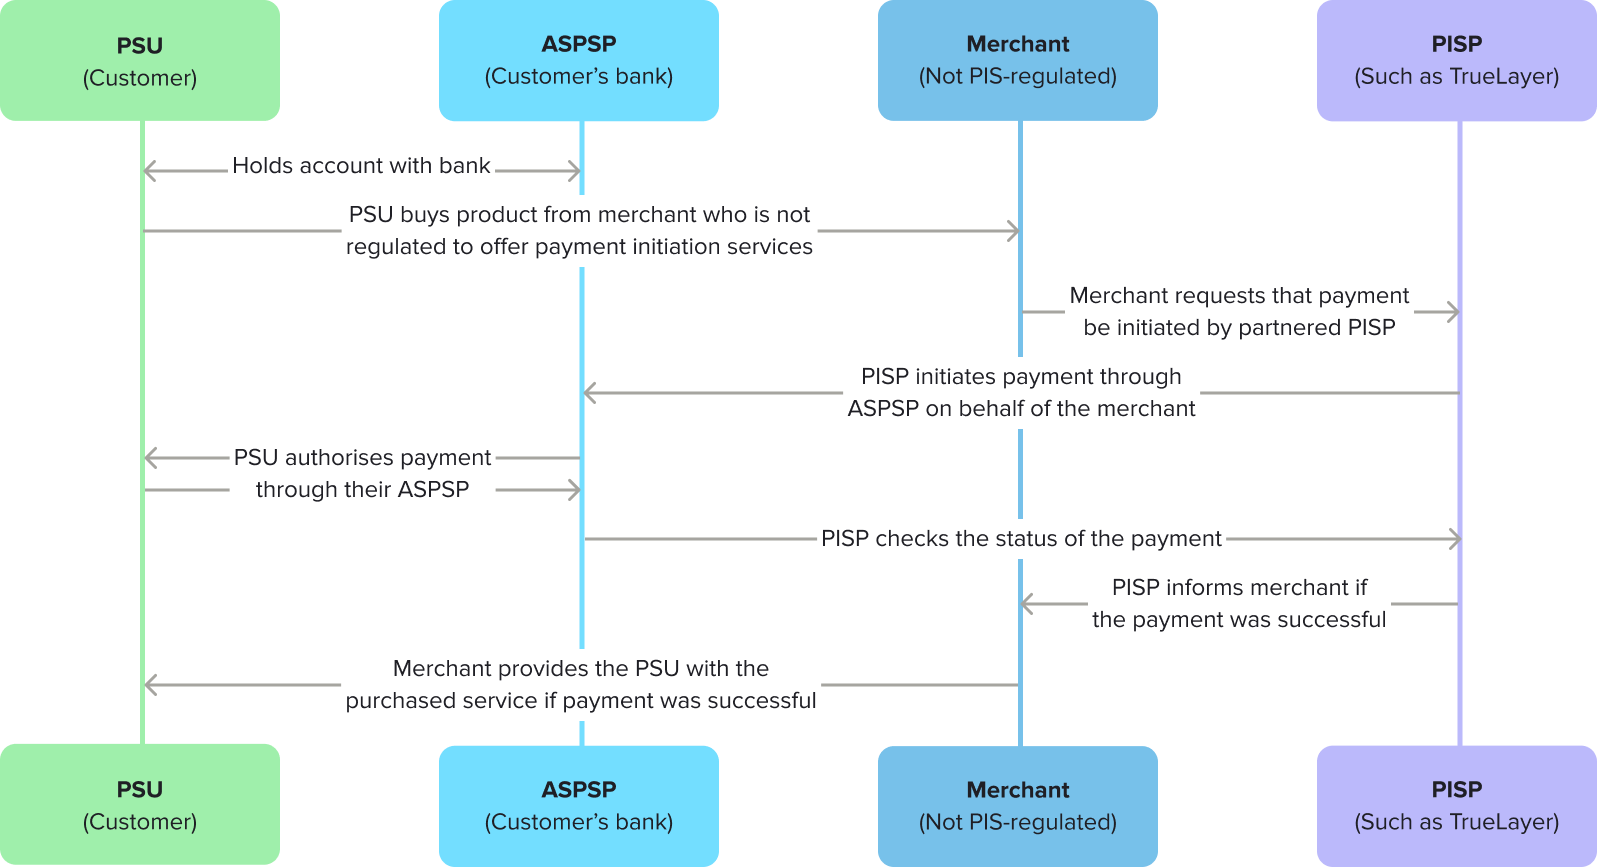 This diagram shows how a payment initiation request flows. In layman's terms, it goes from a customer, to a merchant, to a payments provider, then the bank.